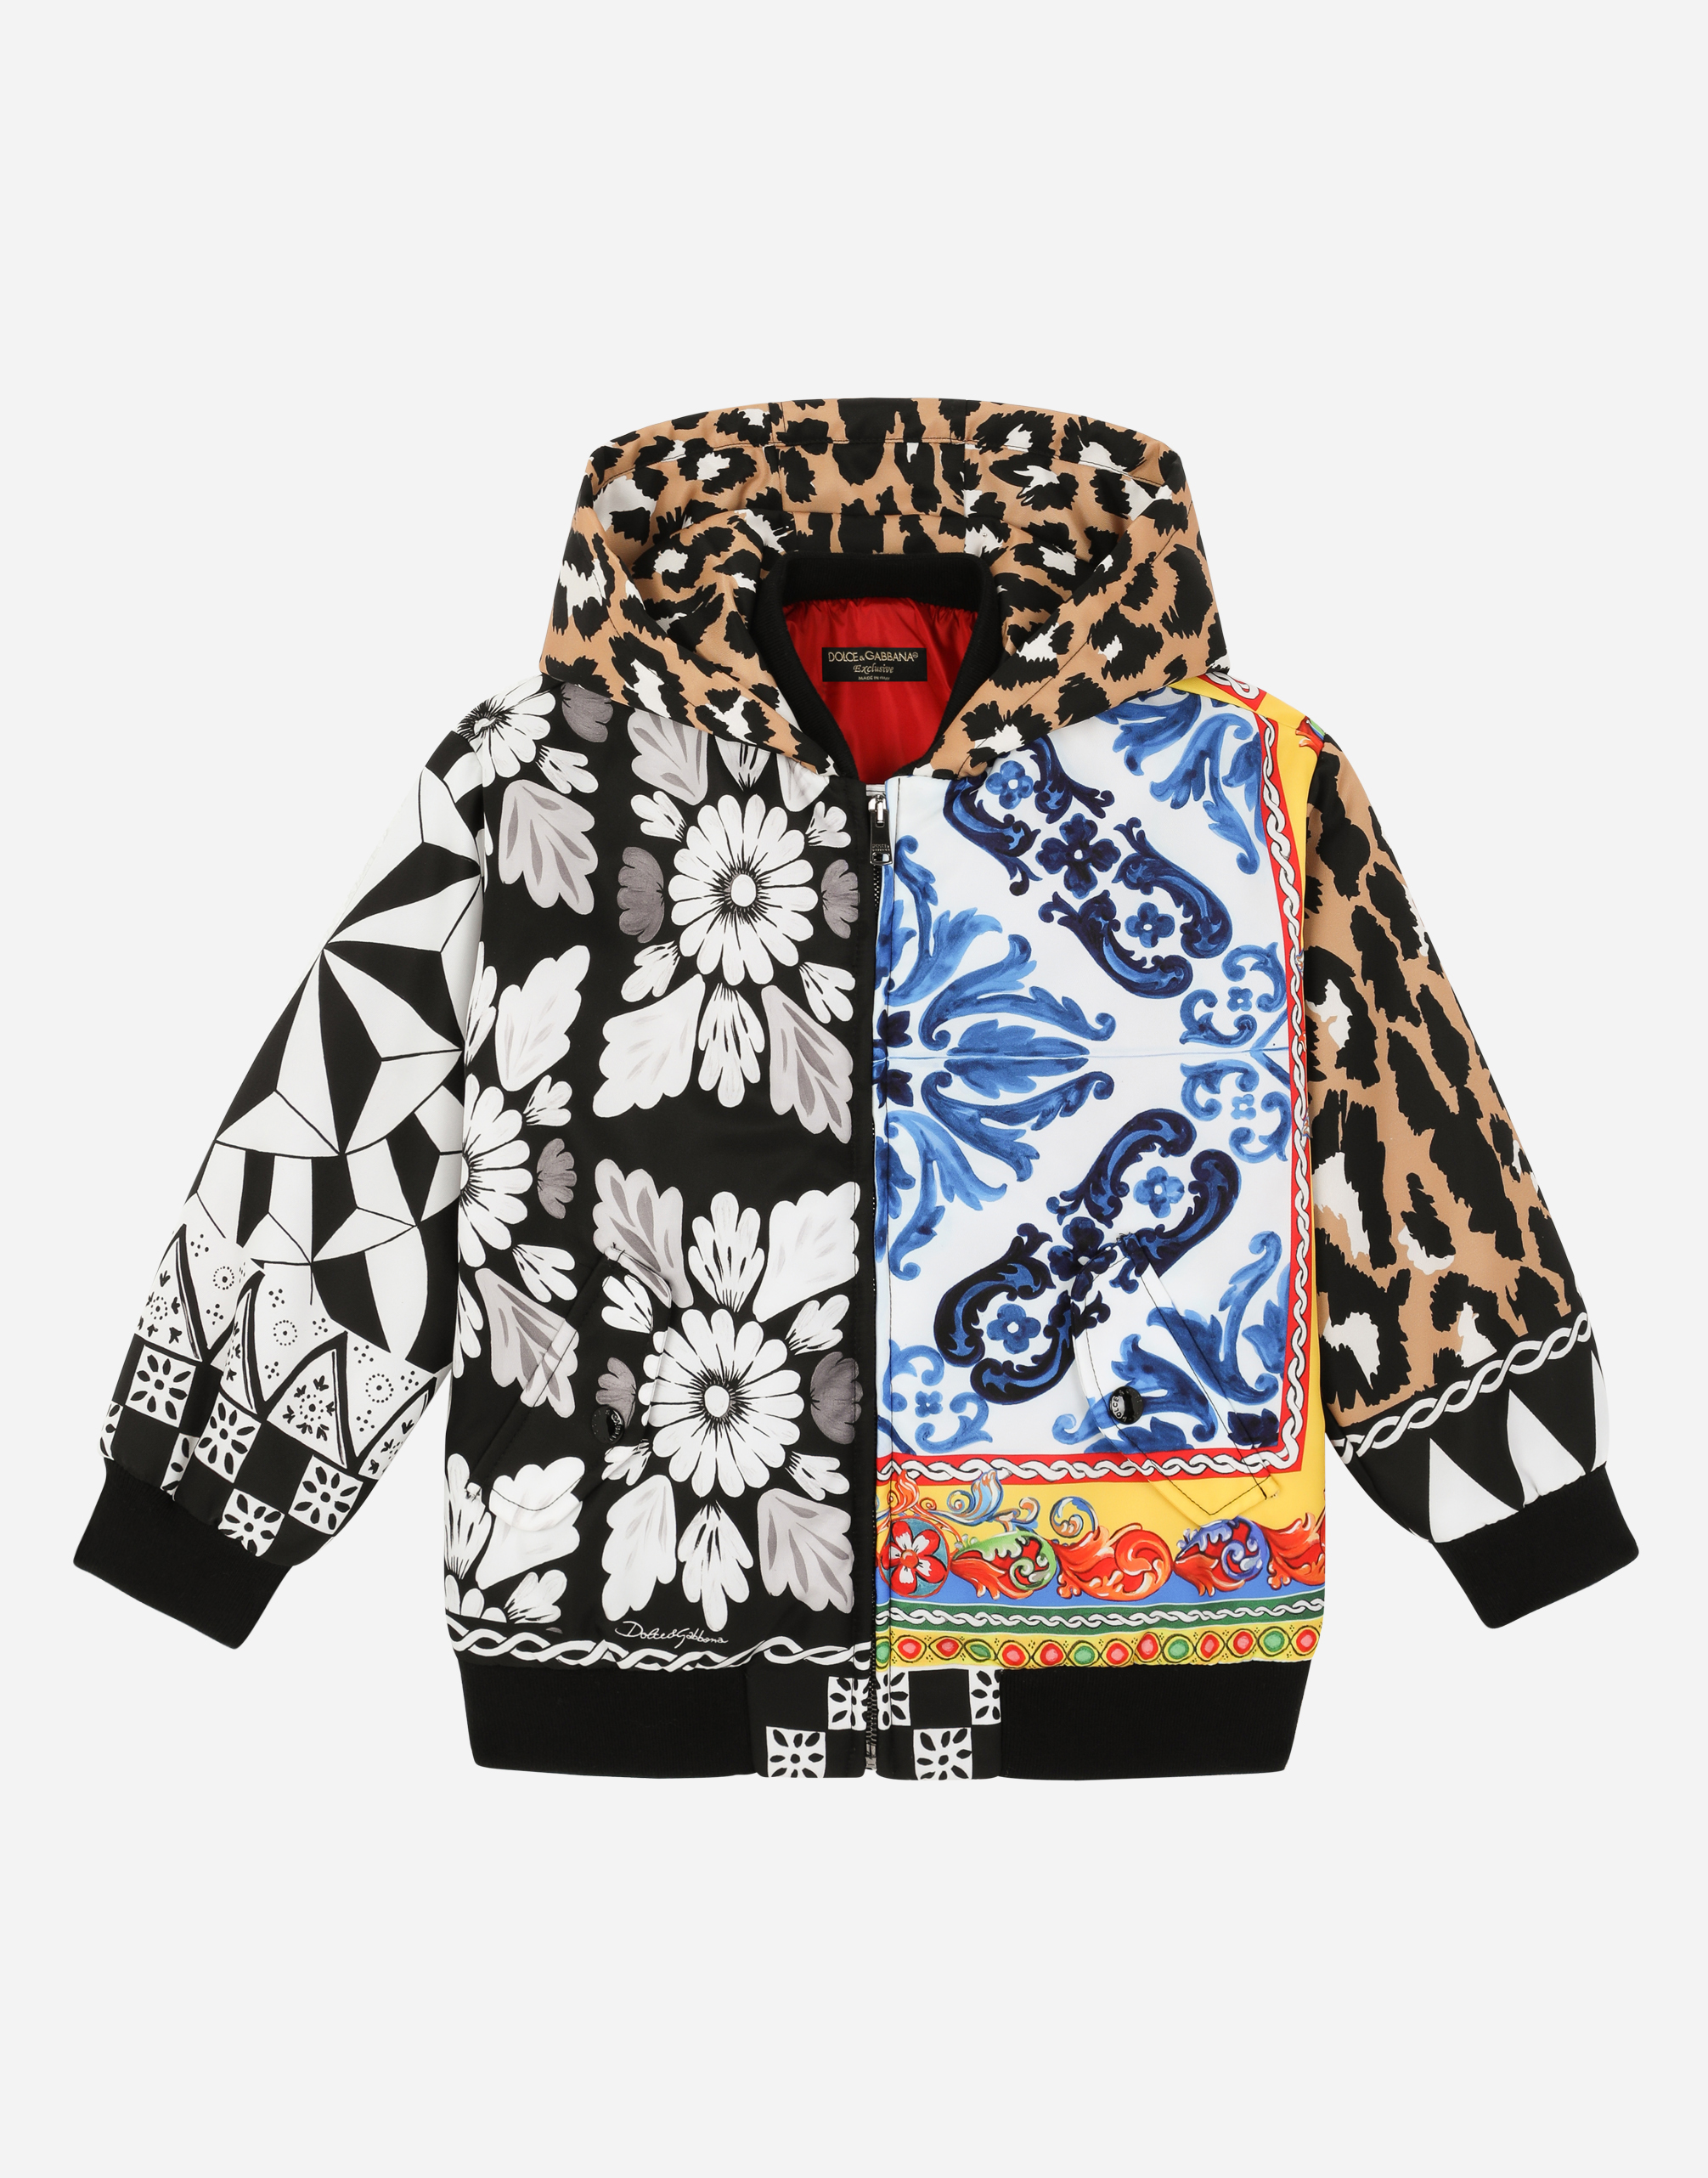 DOLCE & GABBANA Waterproof fabric bomber jacket with carretto patchwork print